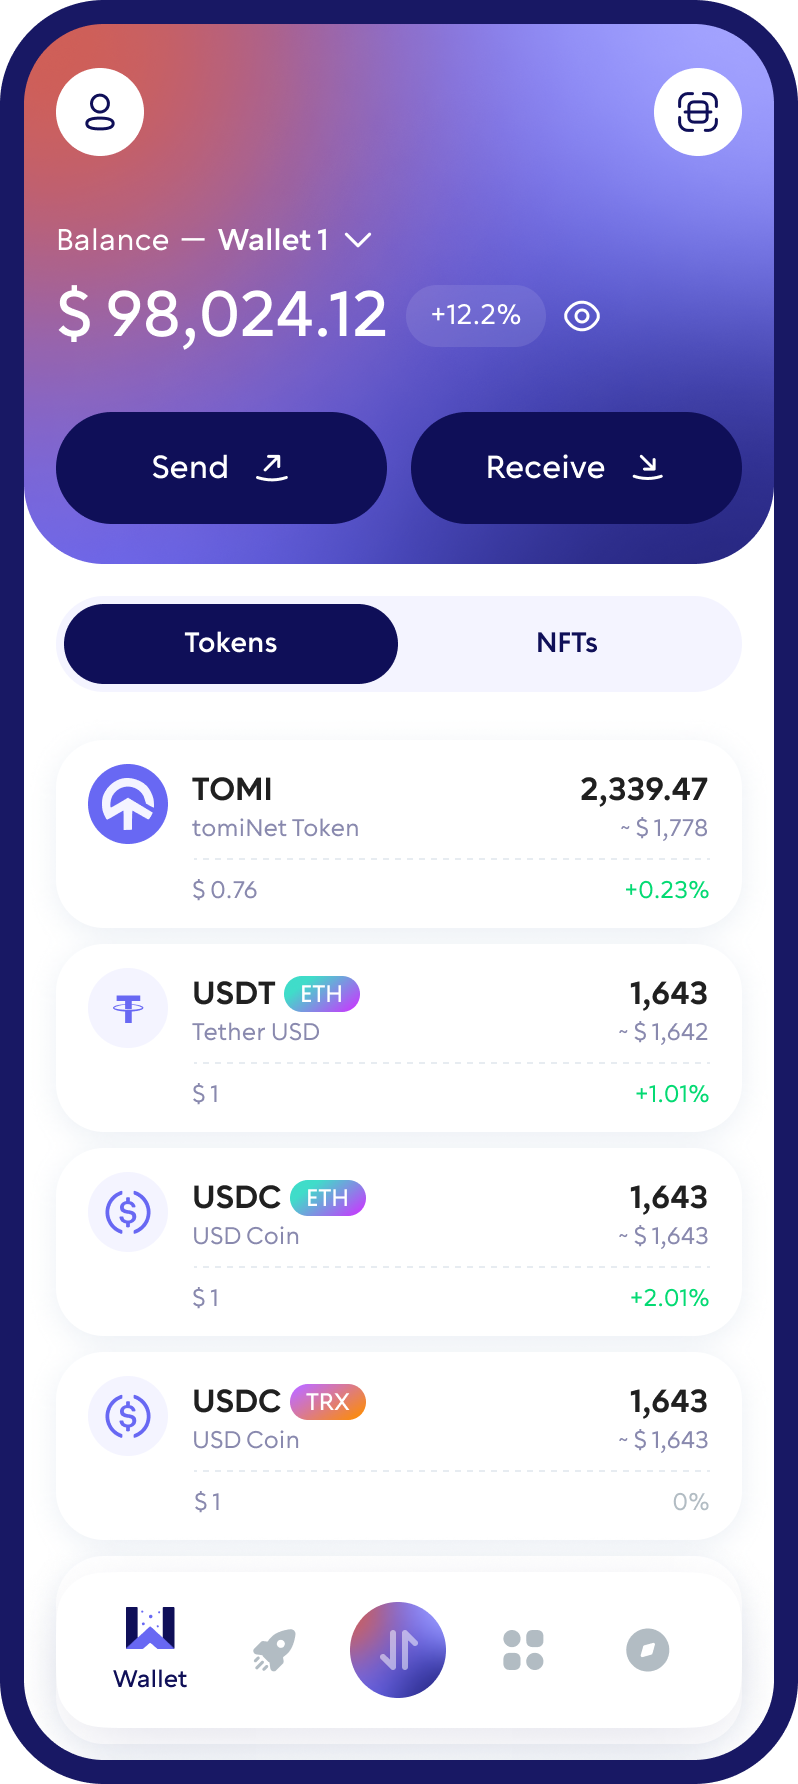 TomiNet (TOMI) Cryptocurrency Wallet Walletverse